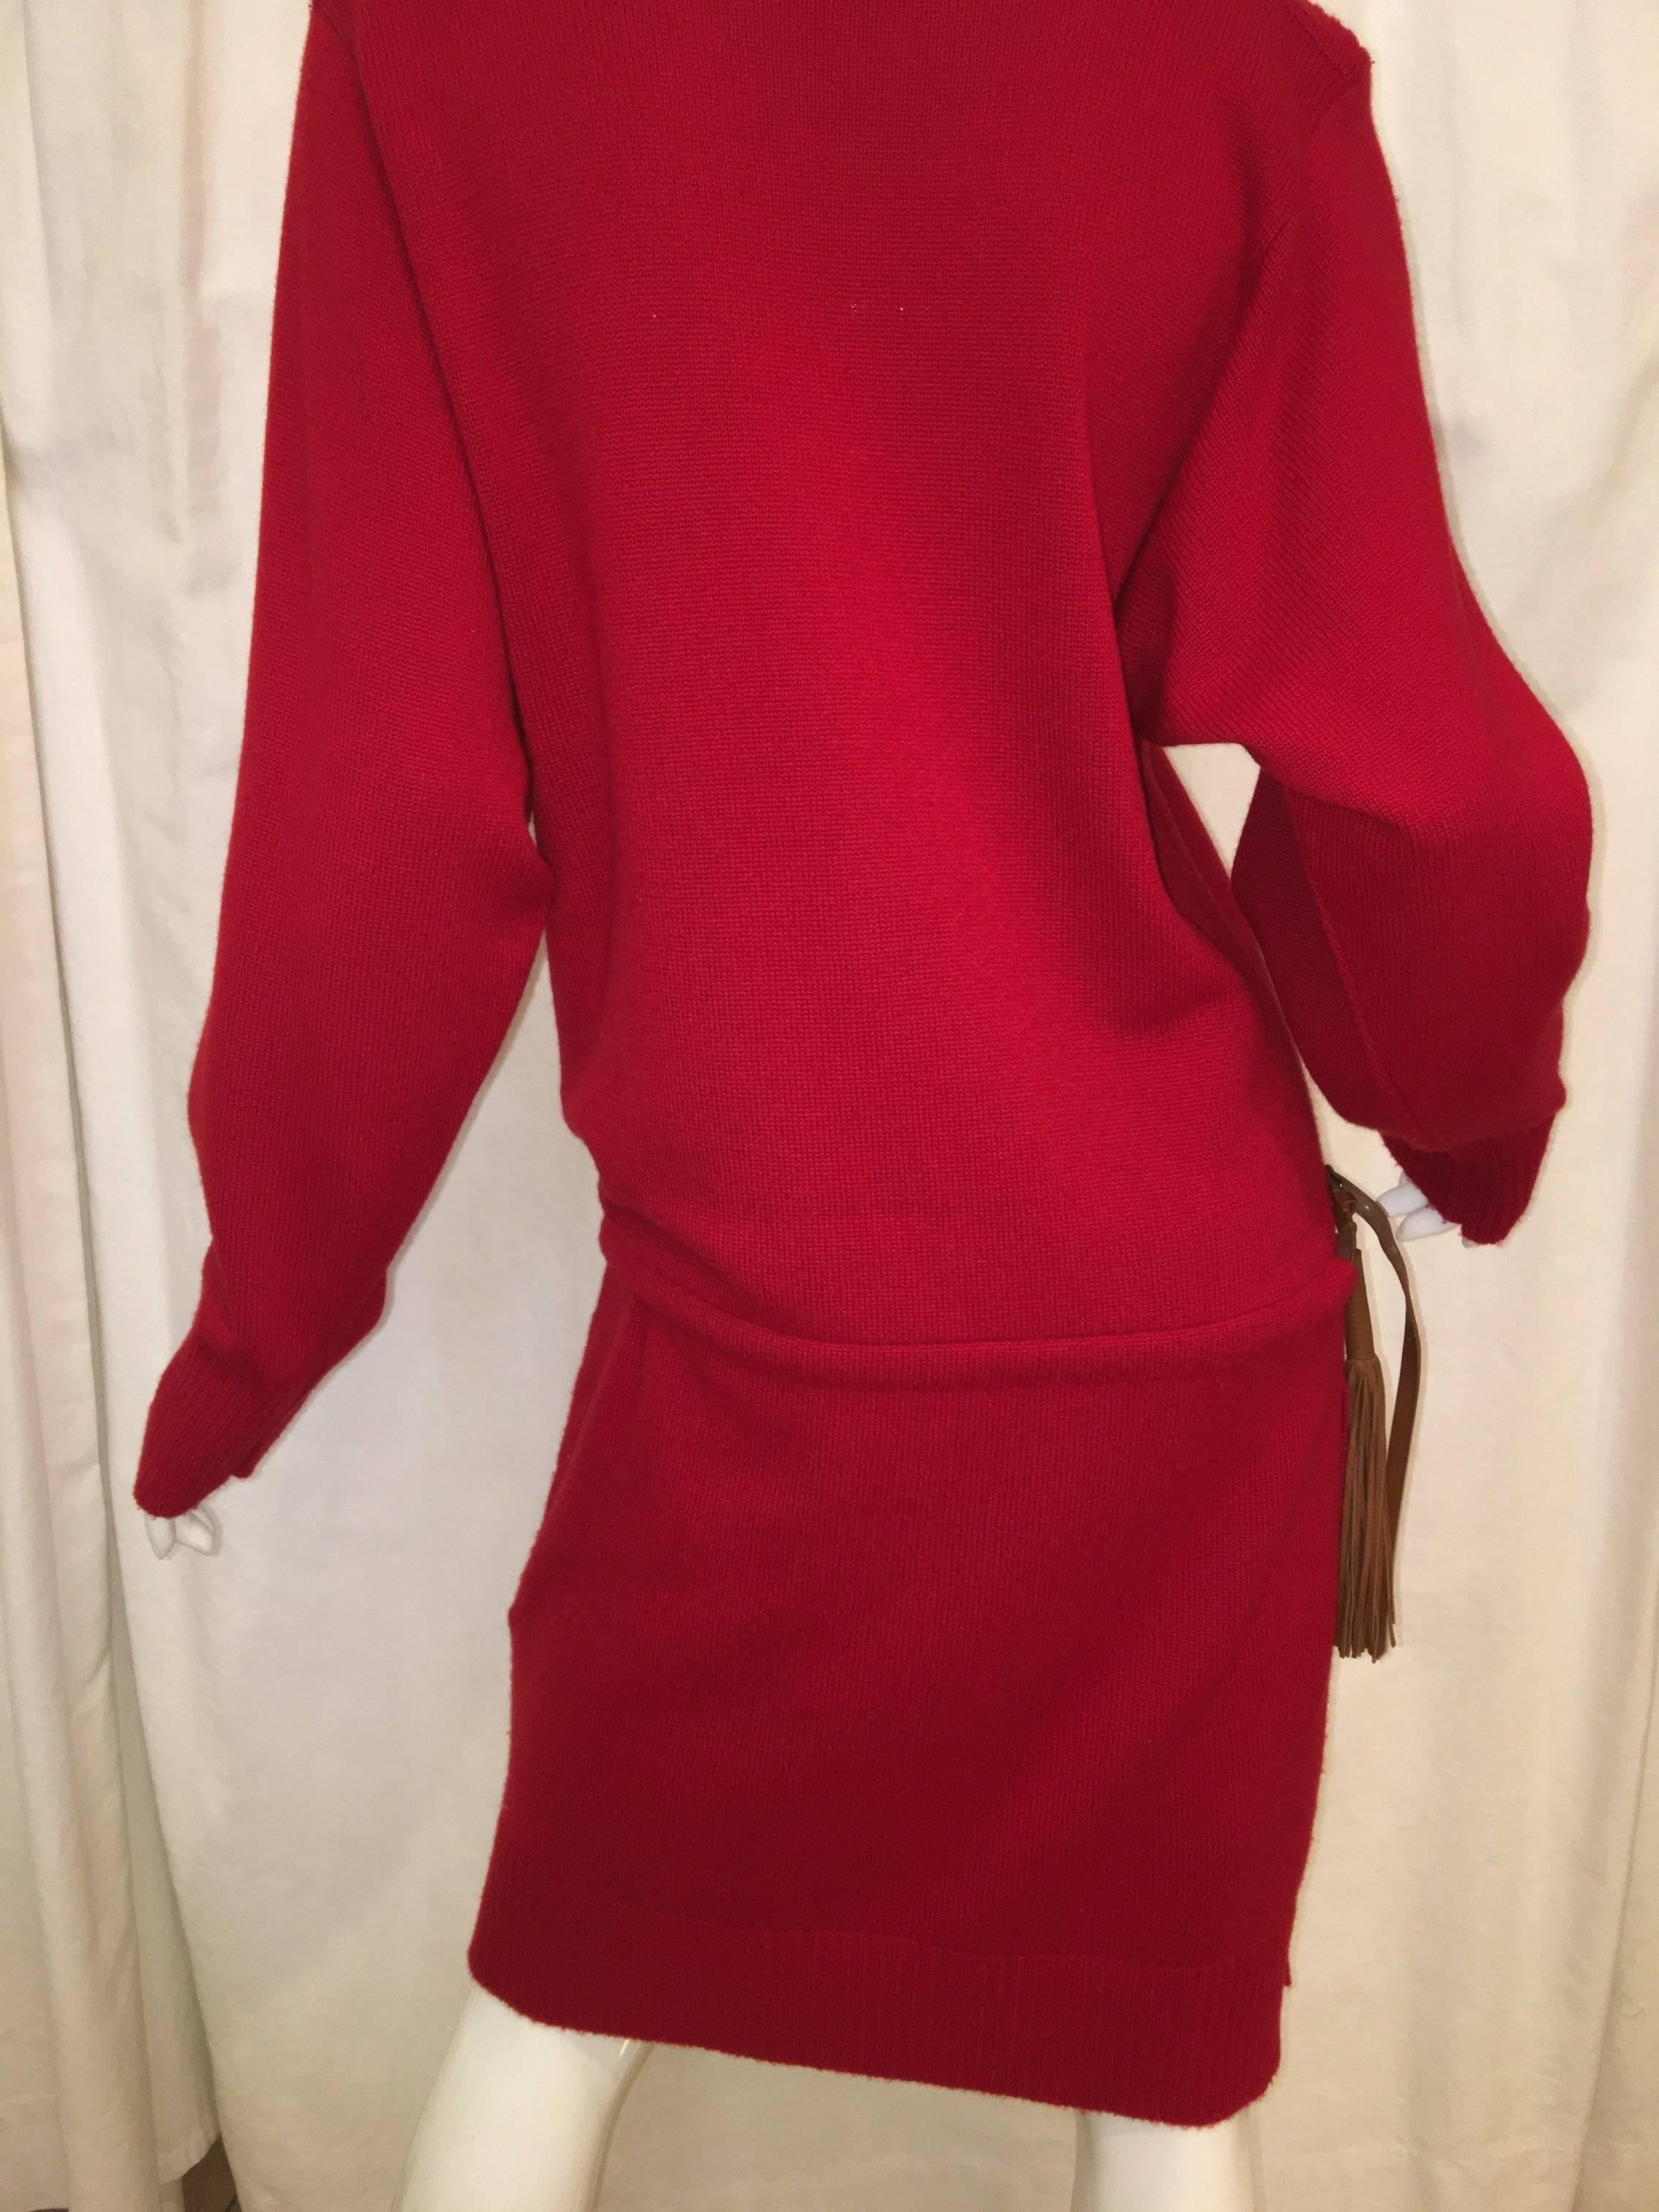 Red Hermes Cashmere Sweater Dress